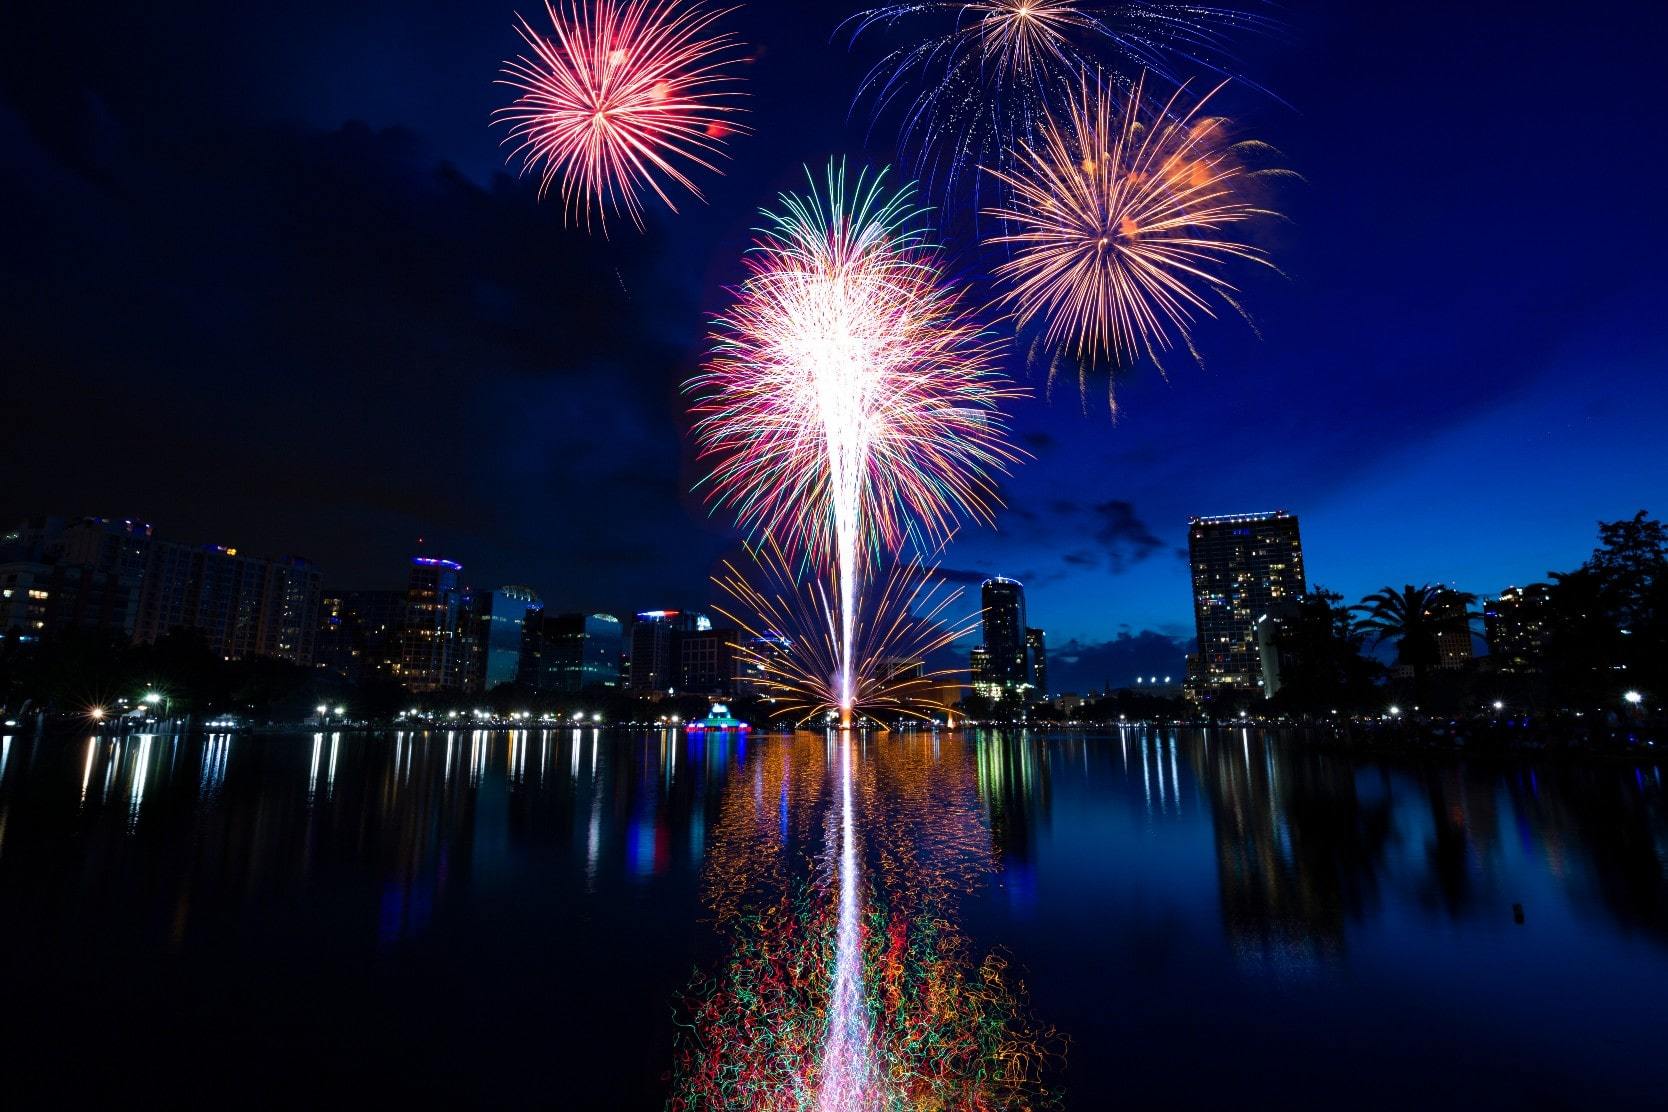 Fireworks over the water in Orlando, Florida